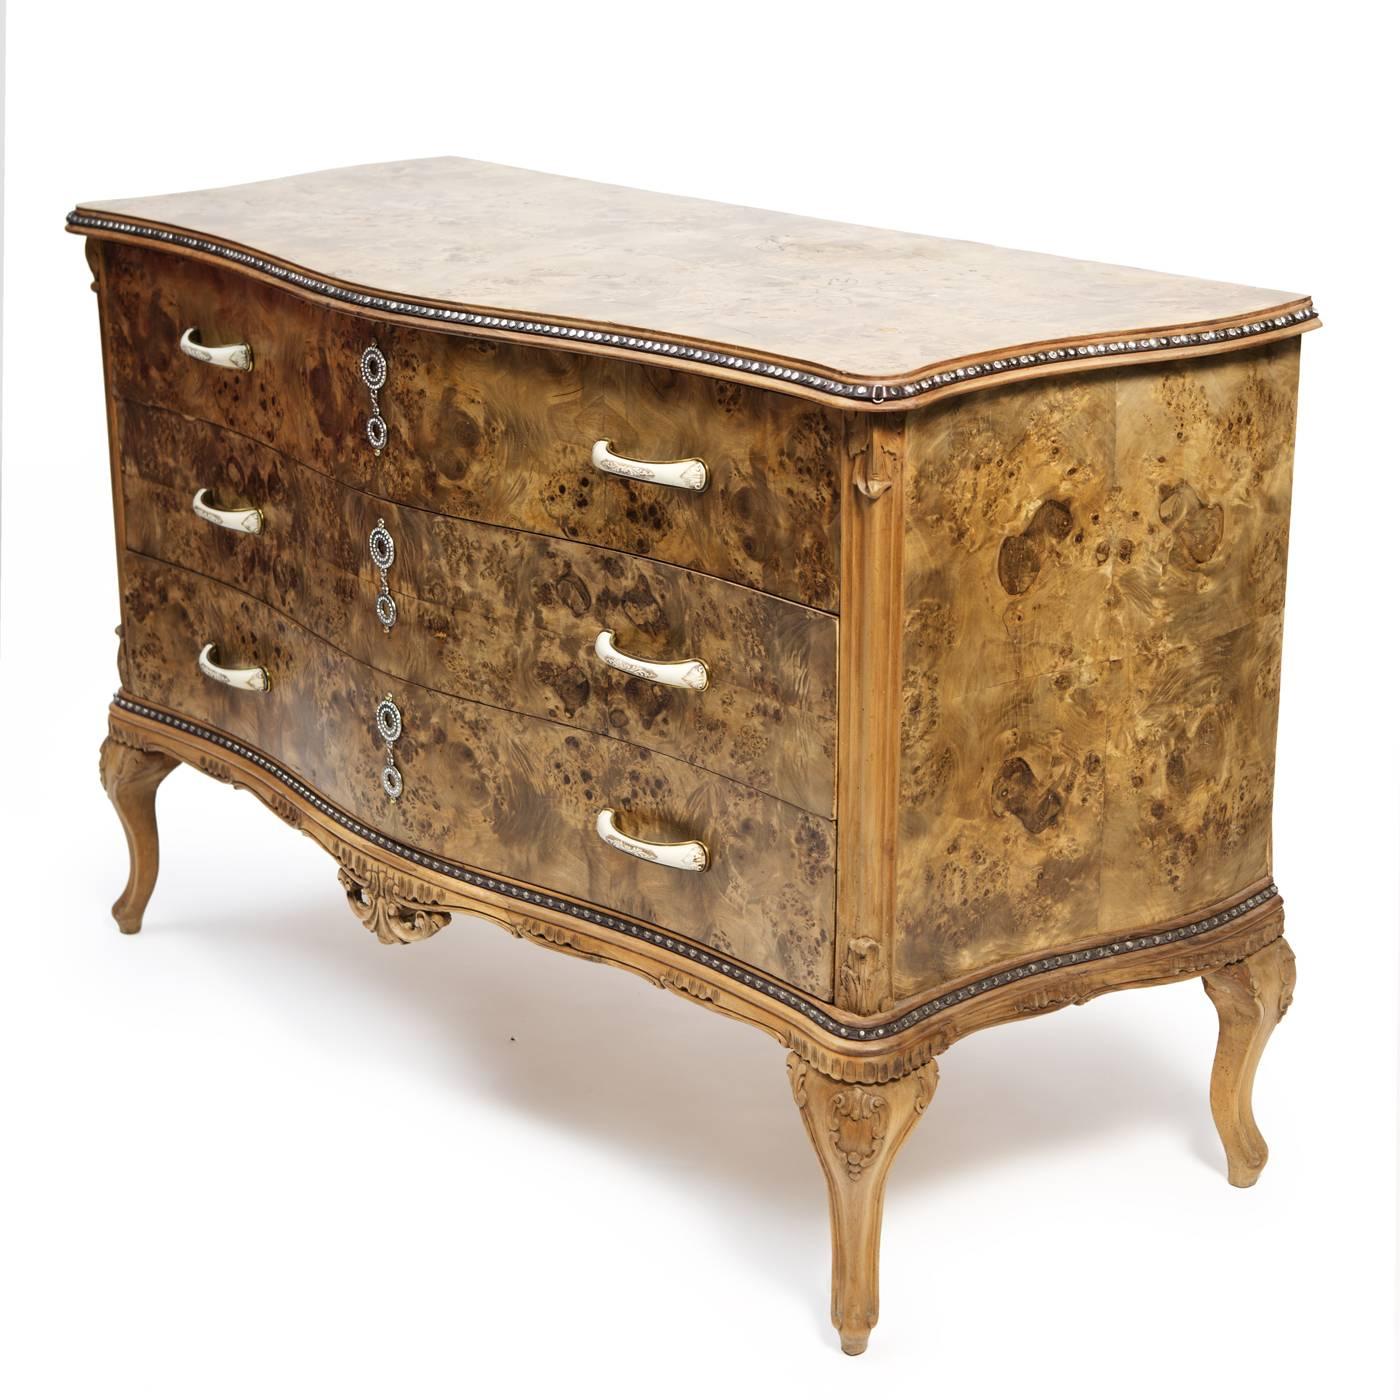 This exquisite dresser is part of the radical chic series, distinctive for its soft lines and precious materials. The classically inspired Silhouette in walnut root was restored to its natural state and boasts the striking natural patterns of the